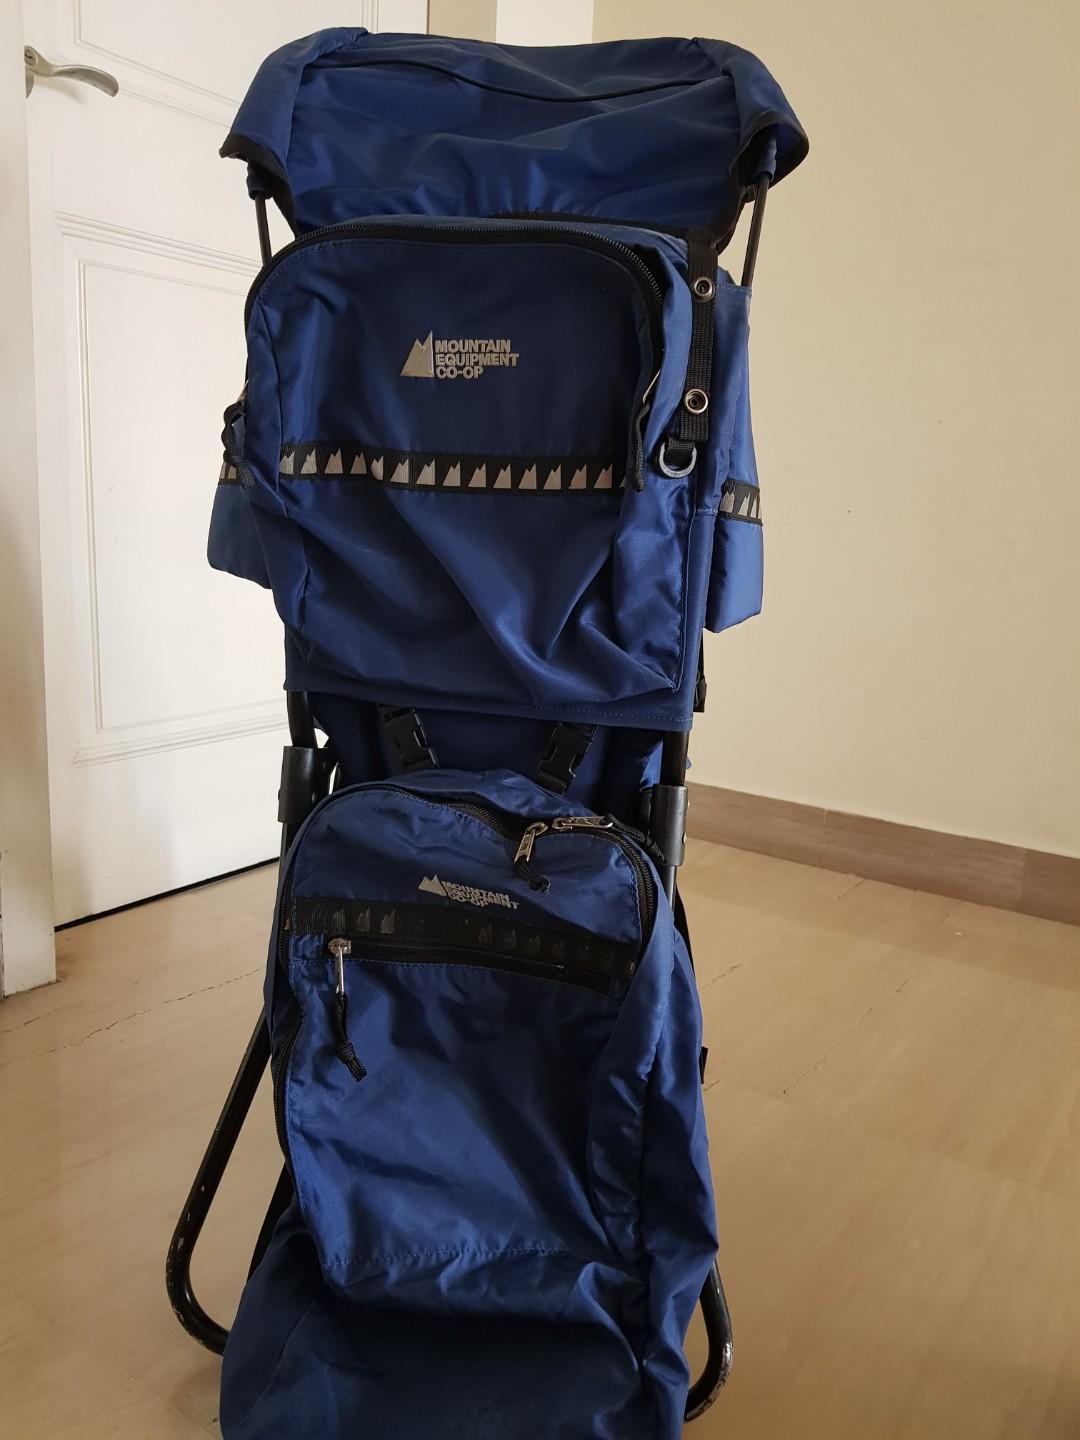 mountain equipment coop child carrier